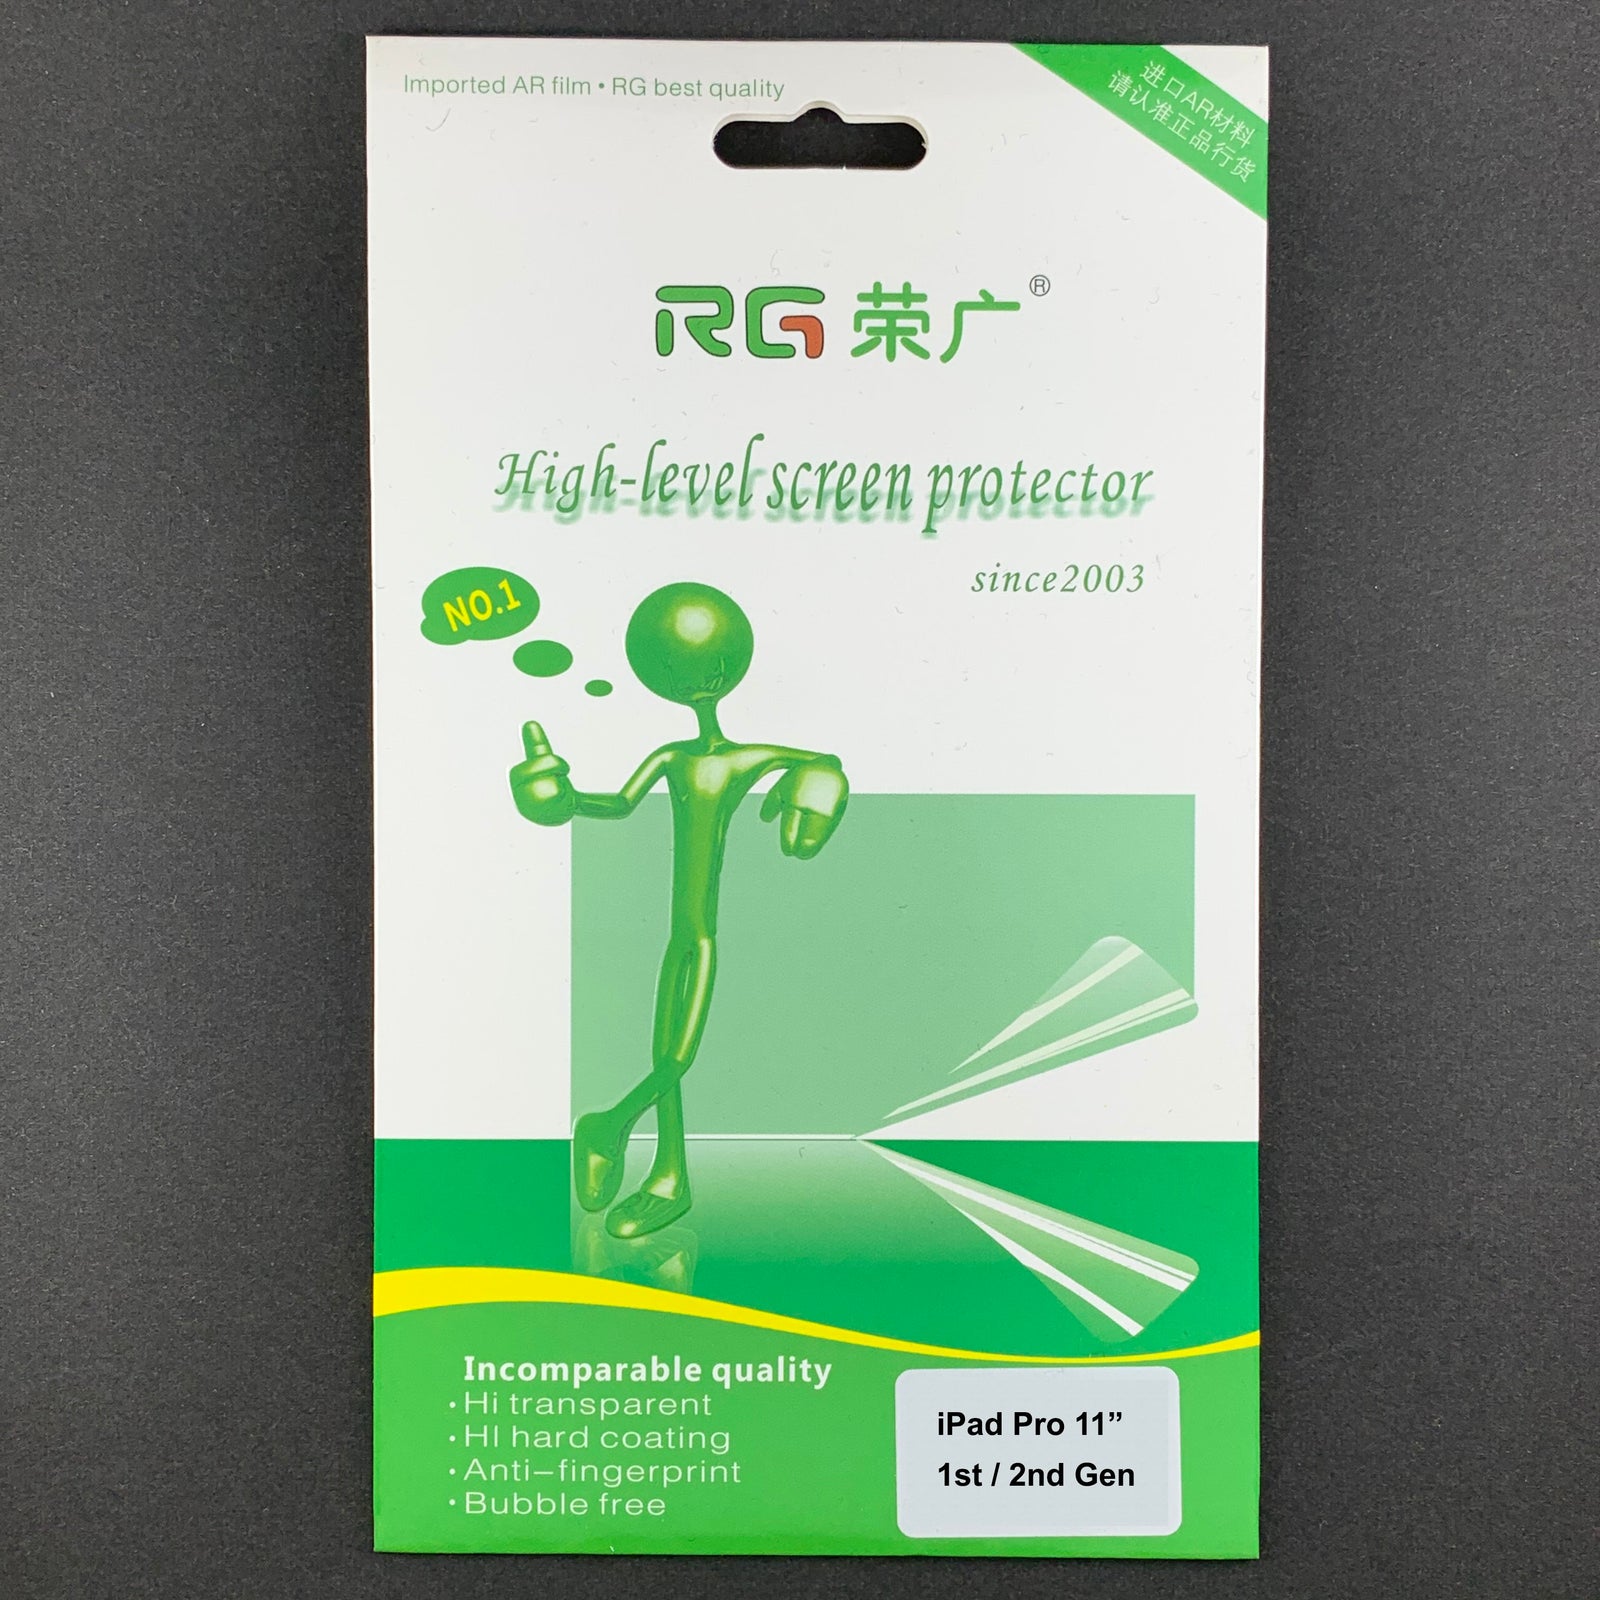 RG Professional Soft Film Screen Protector for iPad Pro 11" 1st / 2nd Gen (CLEAR, 2-PACK)